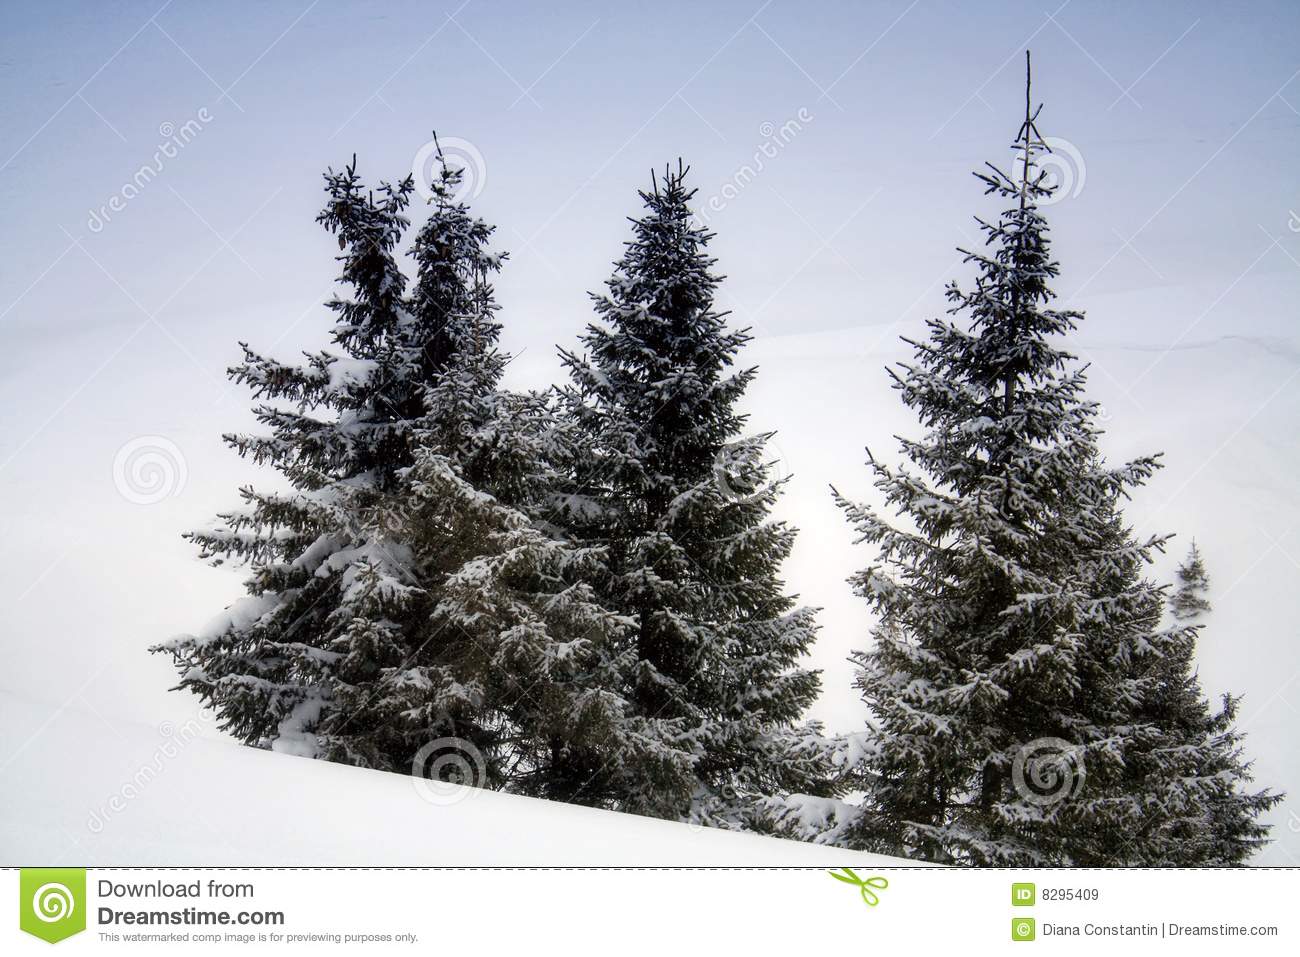 Pine Trees In Snow Royalty Free Stock Images   Image  8295409